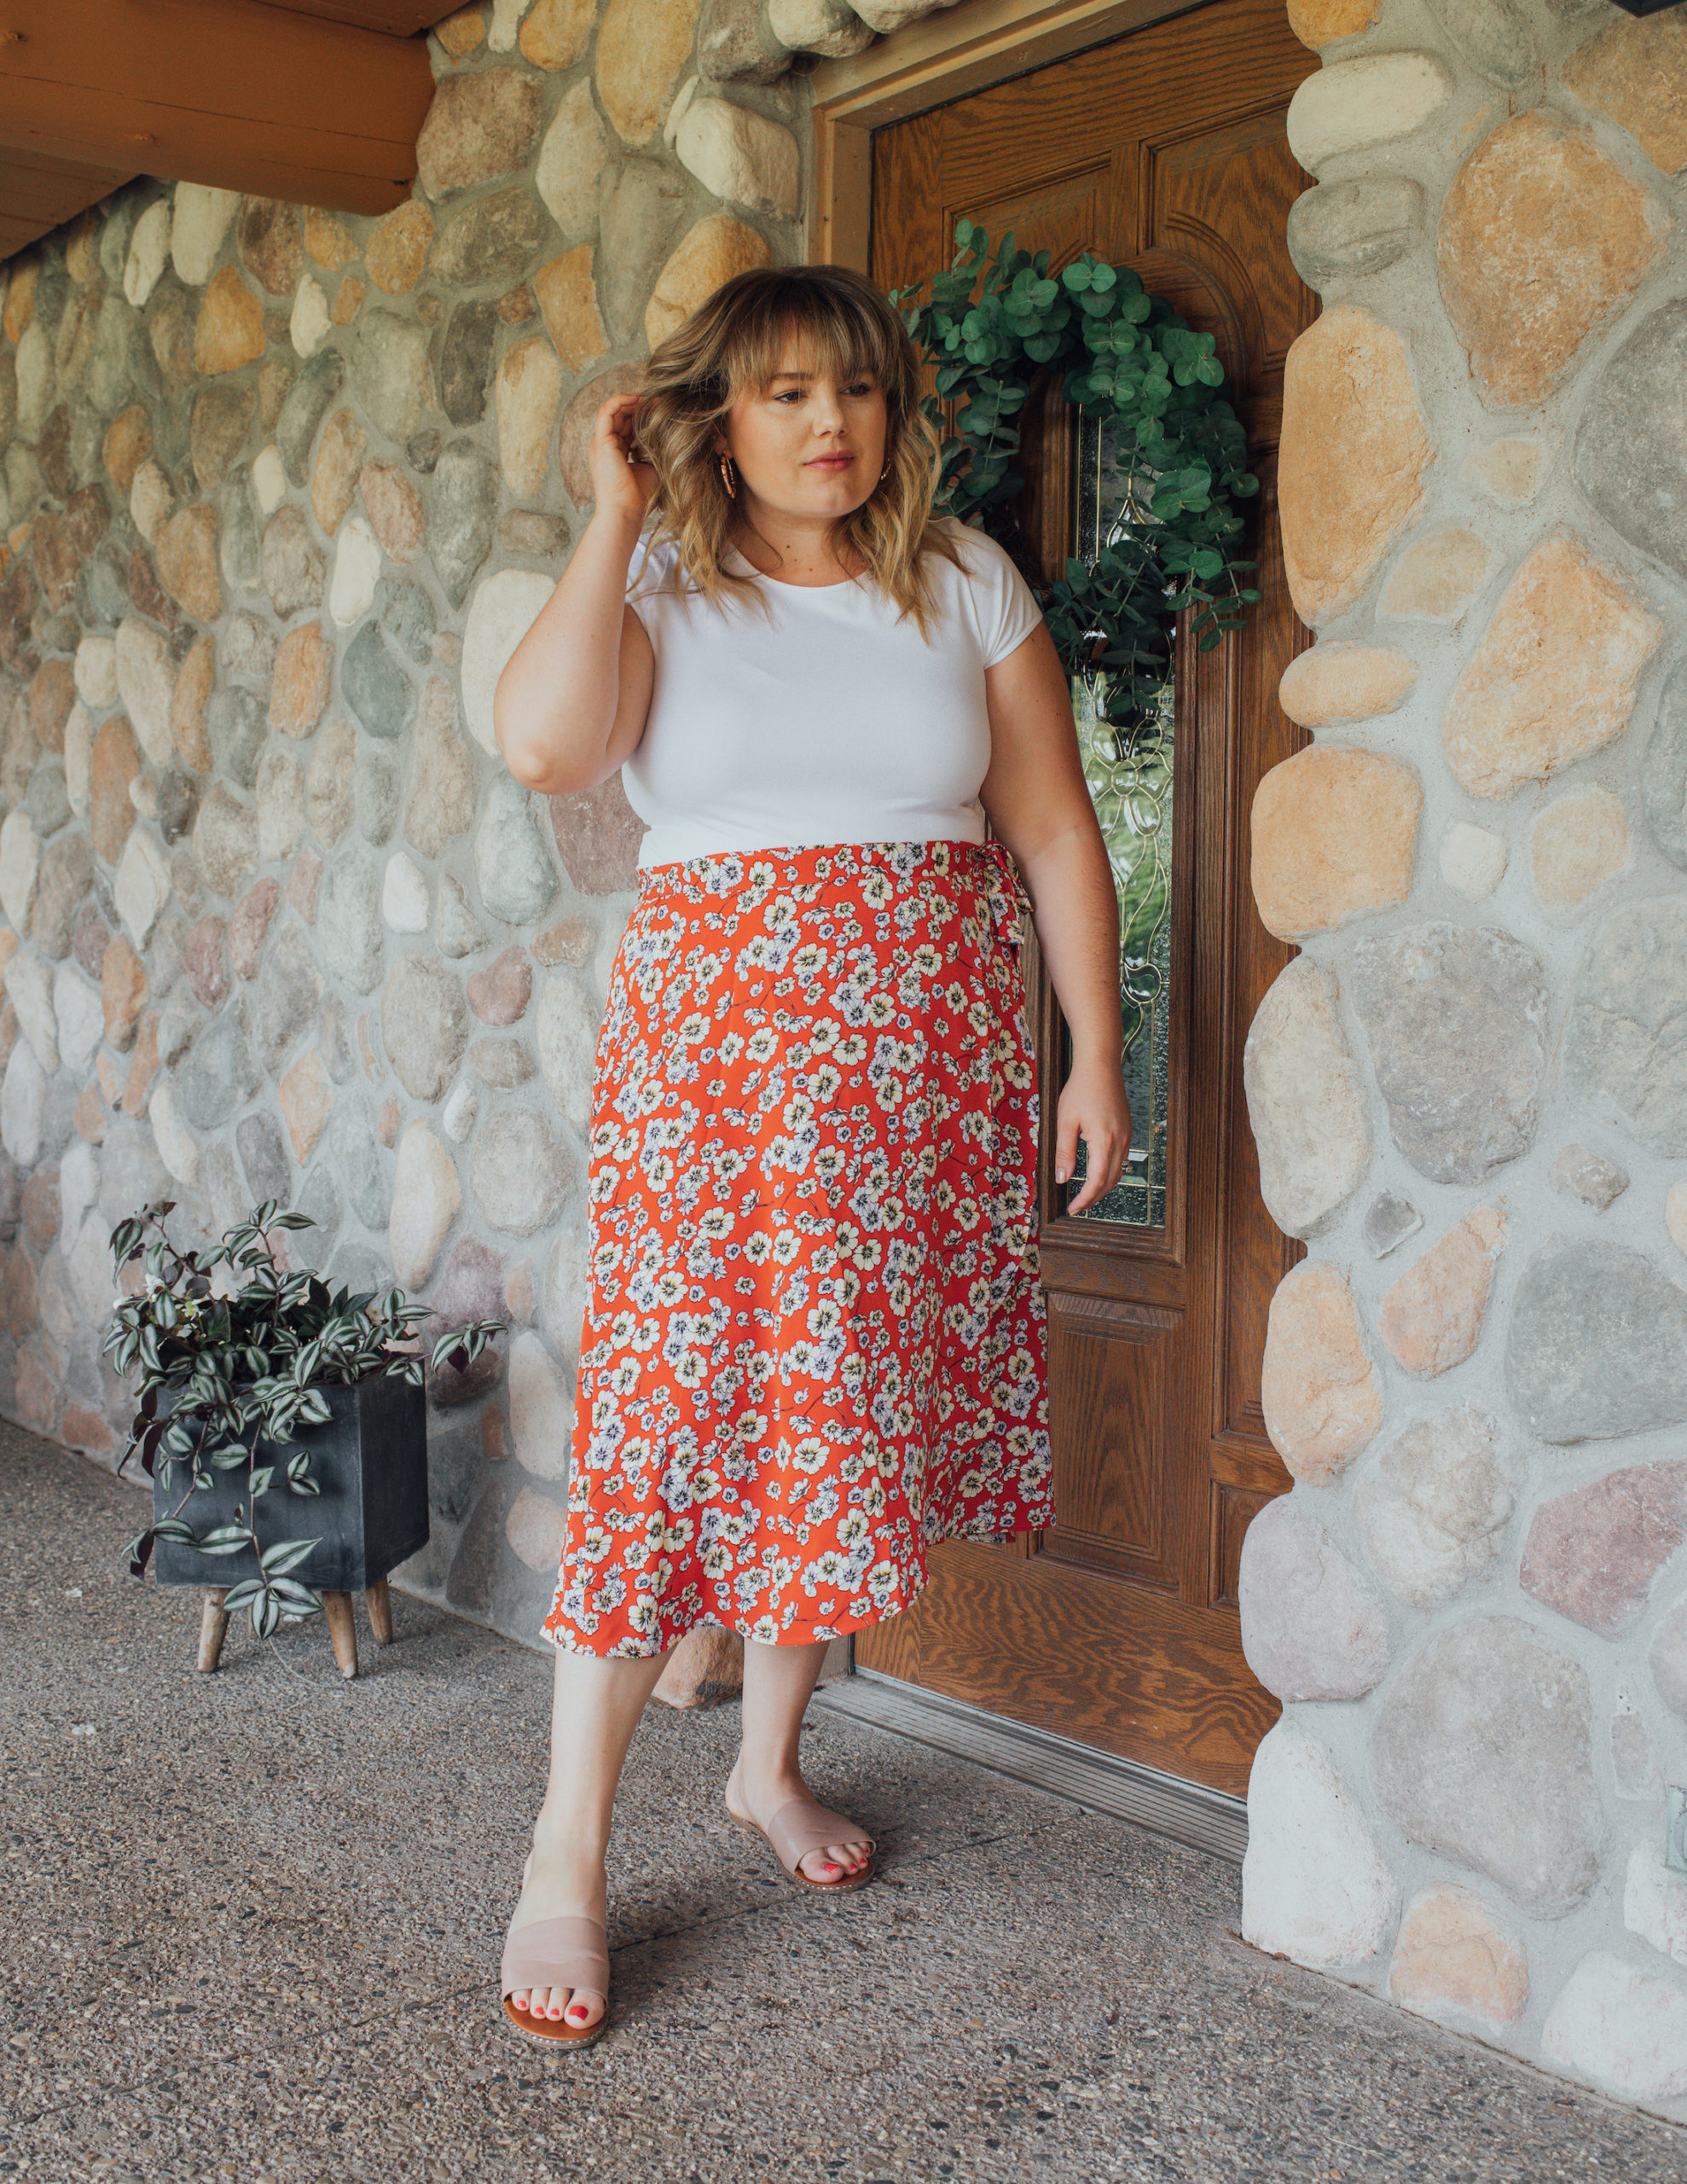 Sharing a fab plus size bodysuit + skirt from Walmart on the blog! Get this entire outfit for $60, what a steal!